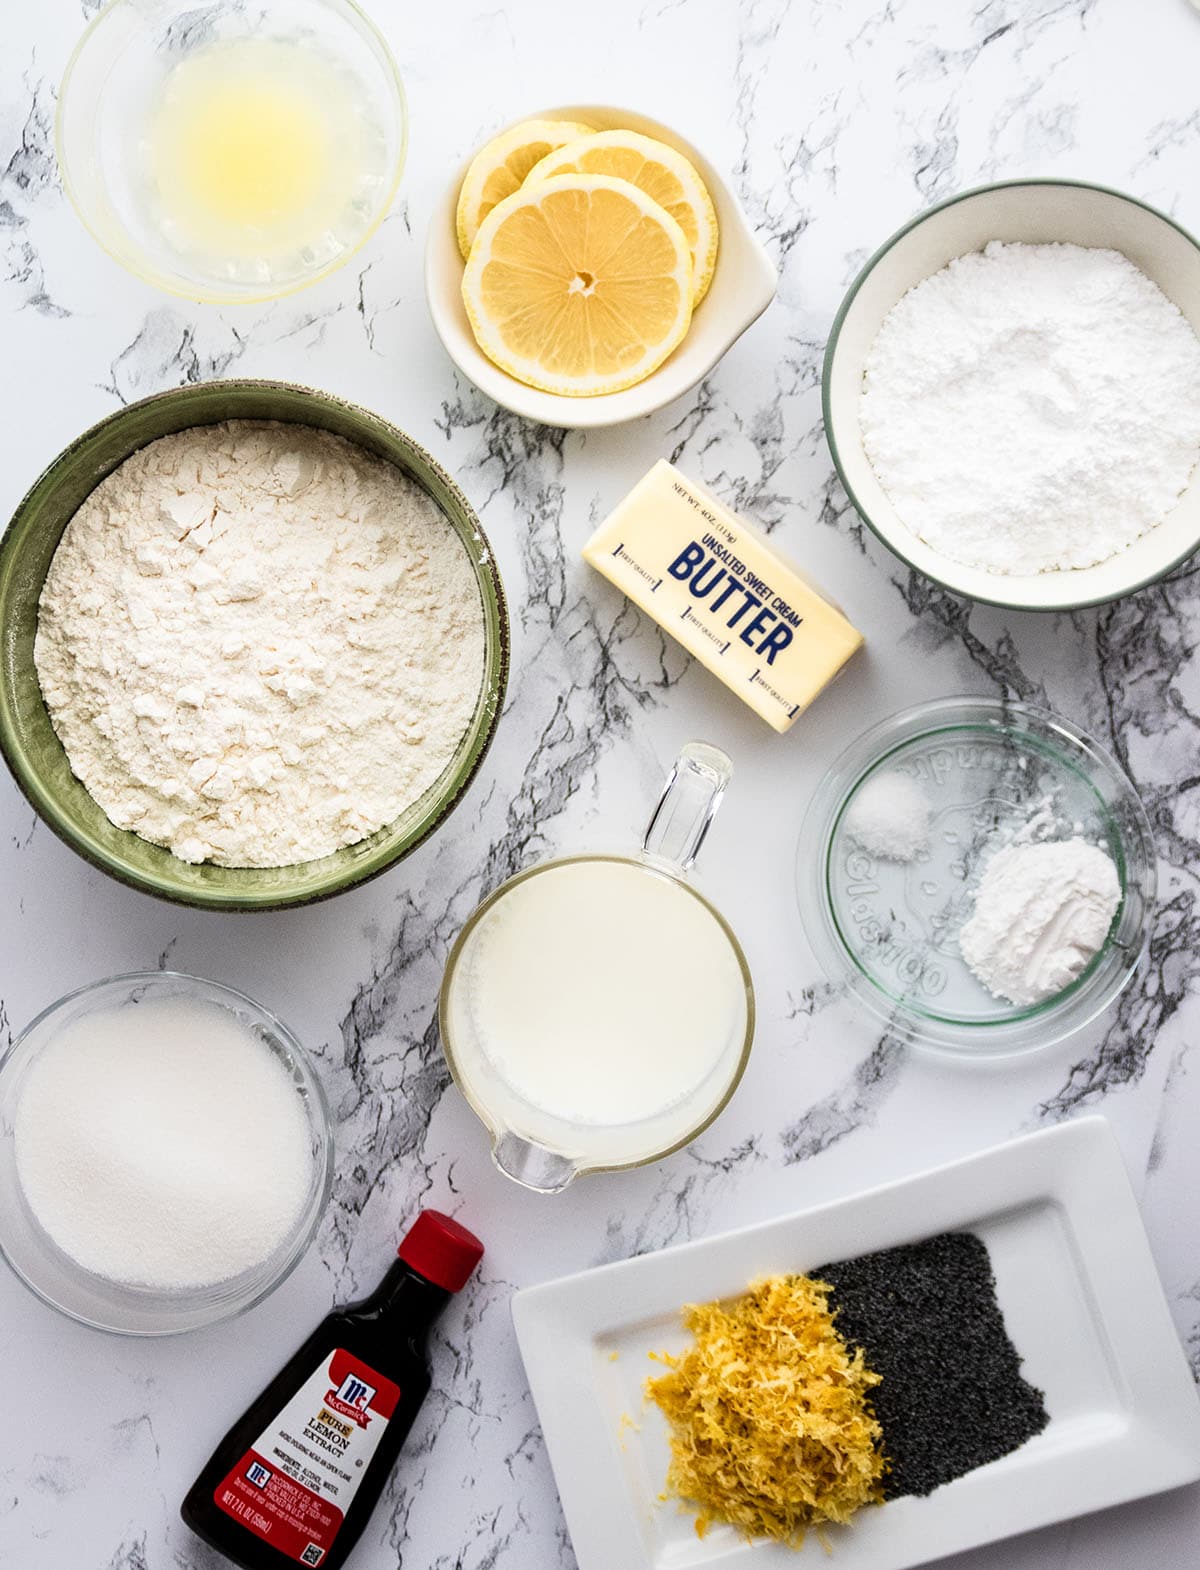 Scone ingredients, measured into individual prep bowls on a white table.